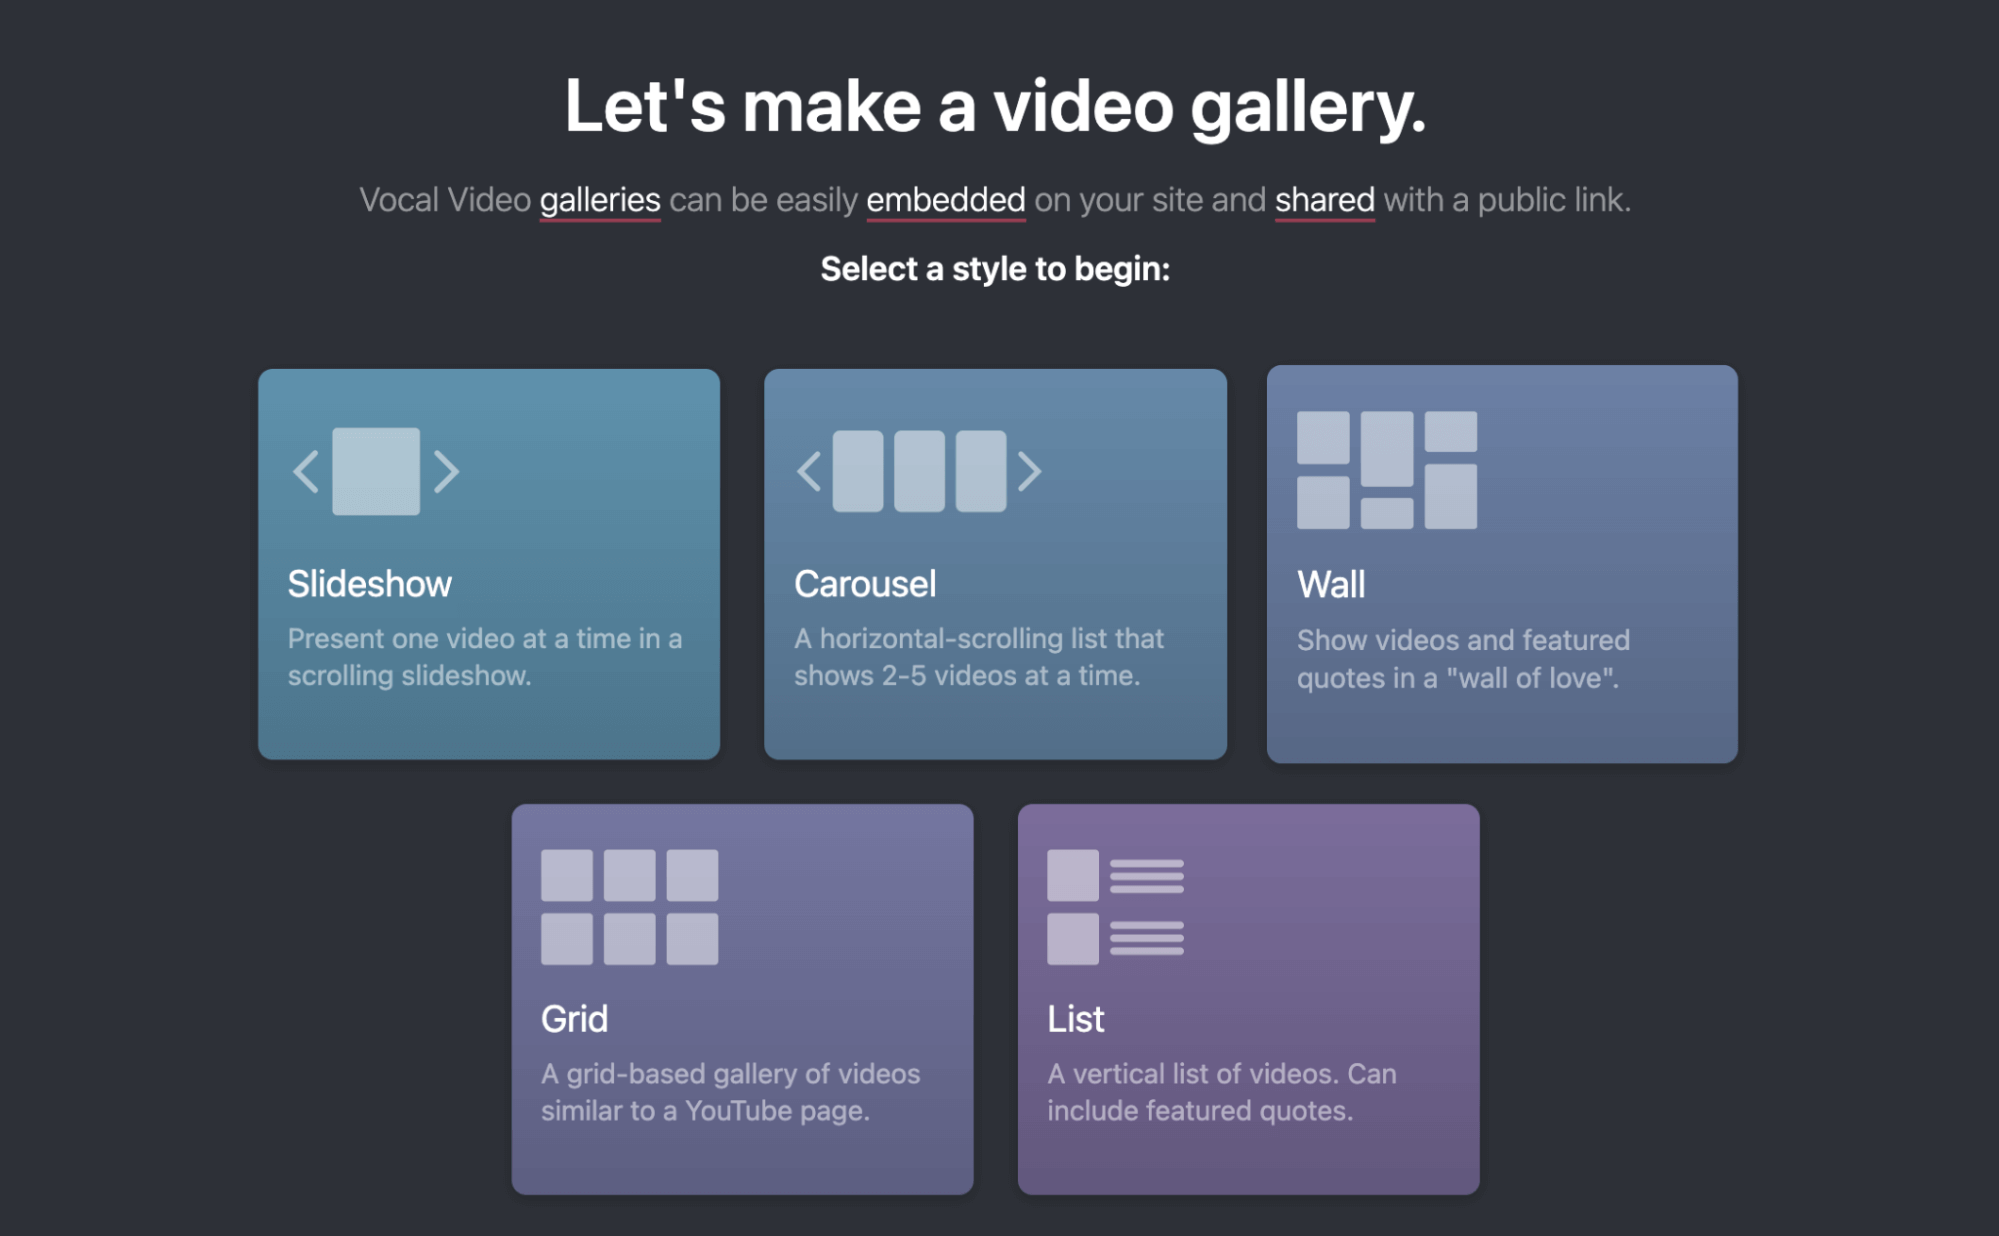 Let's make a video gallery screen. 